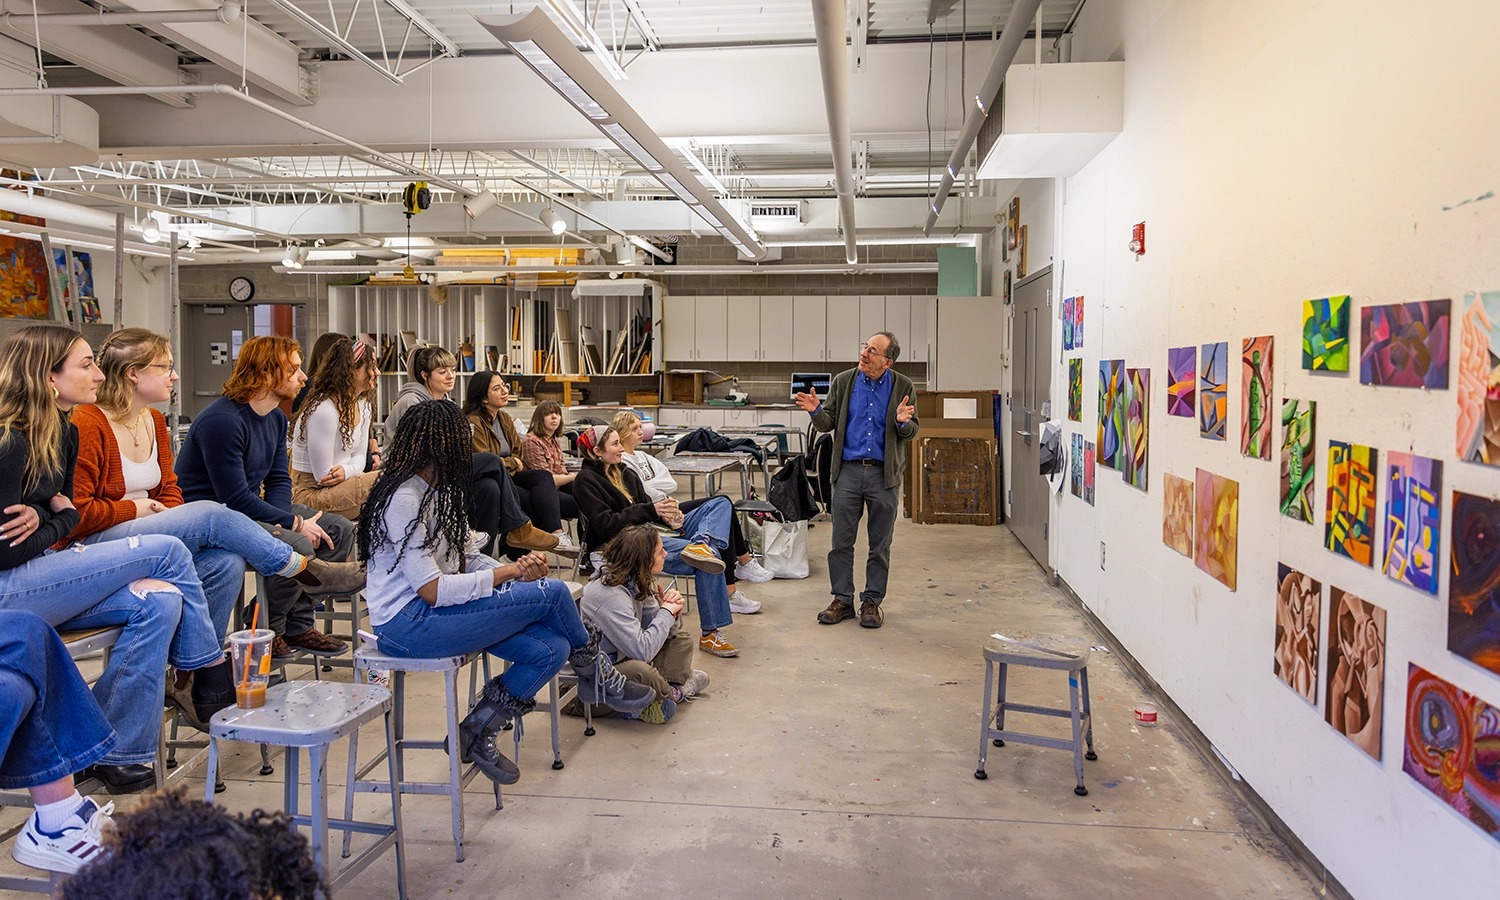 Professor Emeritus of Art and Architecture Michael Bogin joins “Abstract Painting” with Professor of Art and Architecture Nick Ruth to provide feedback to students on their artwork.